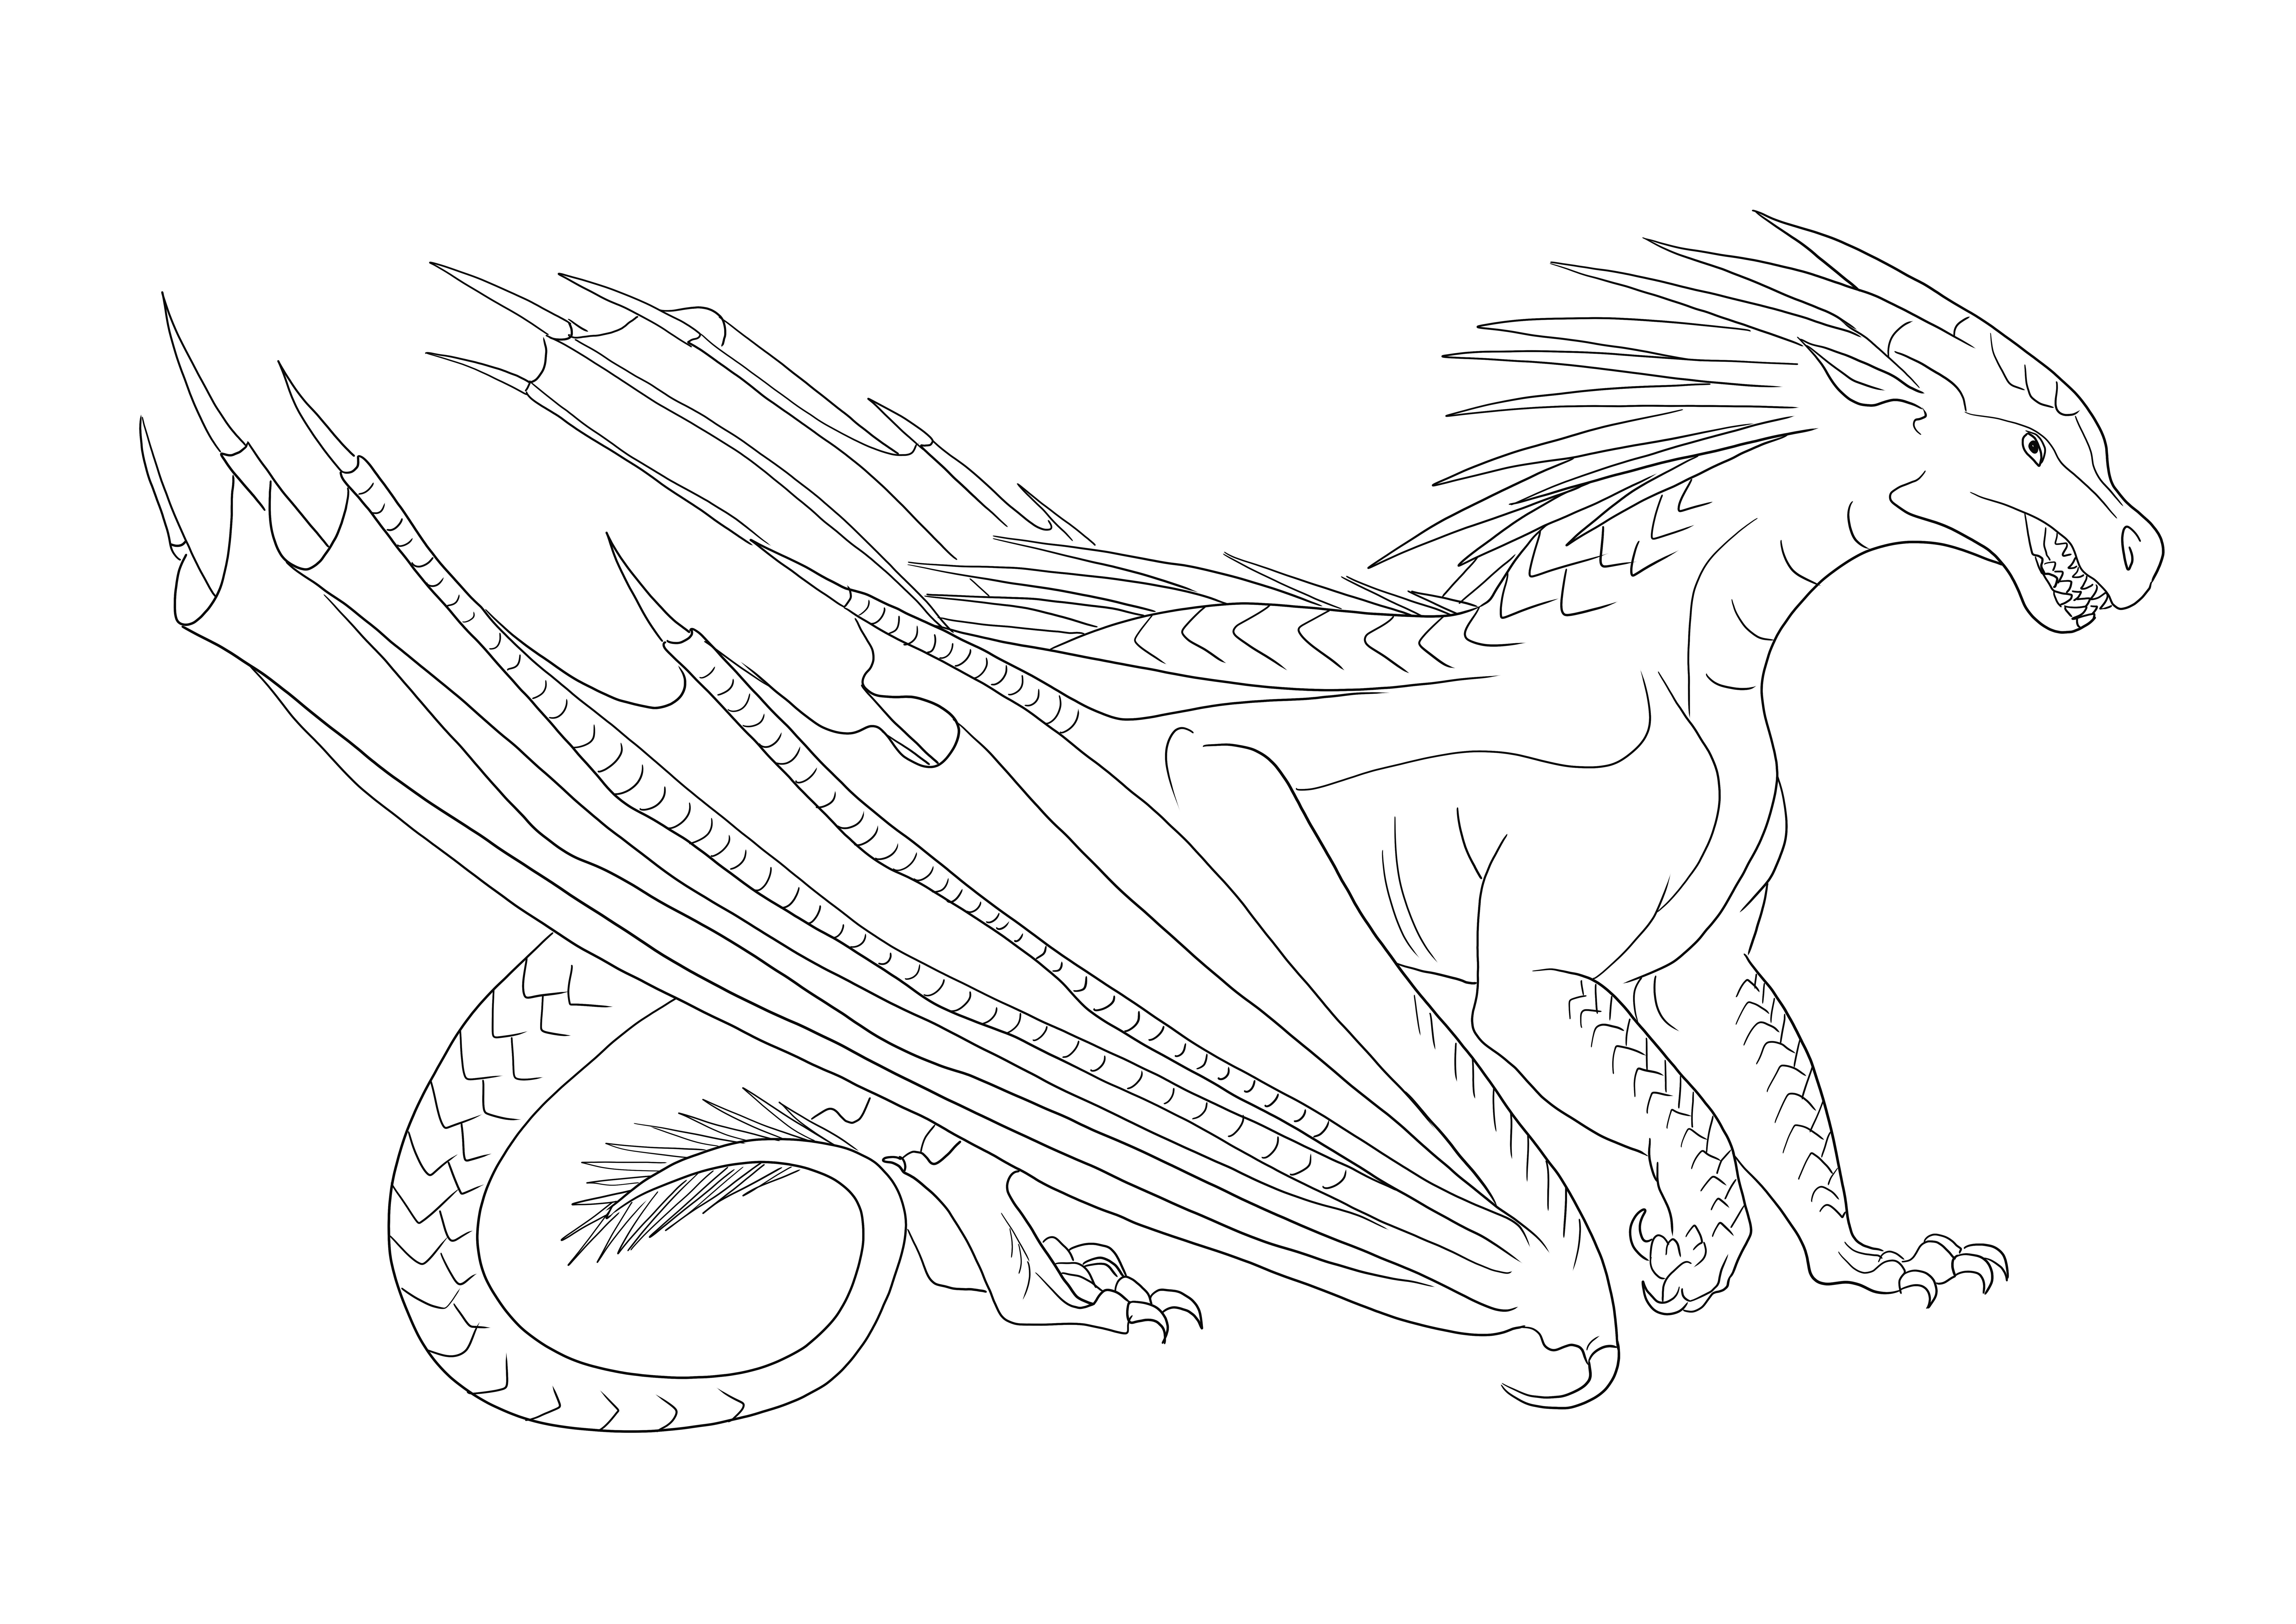 Icewing Dragon from Wings of Fire coloring sheet for free printing